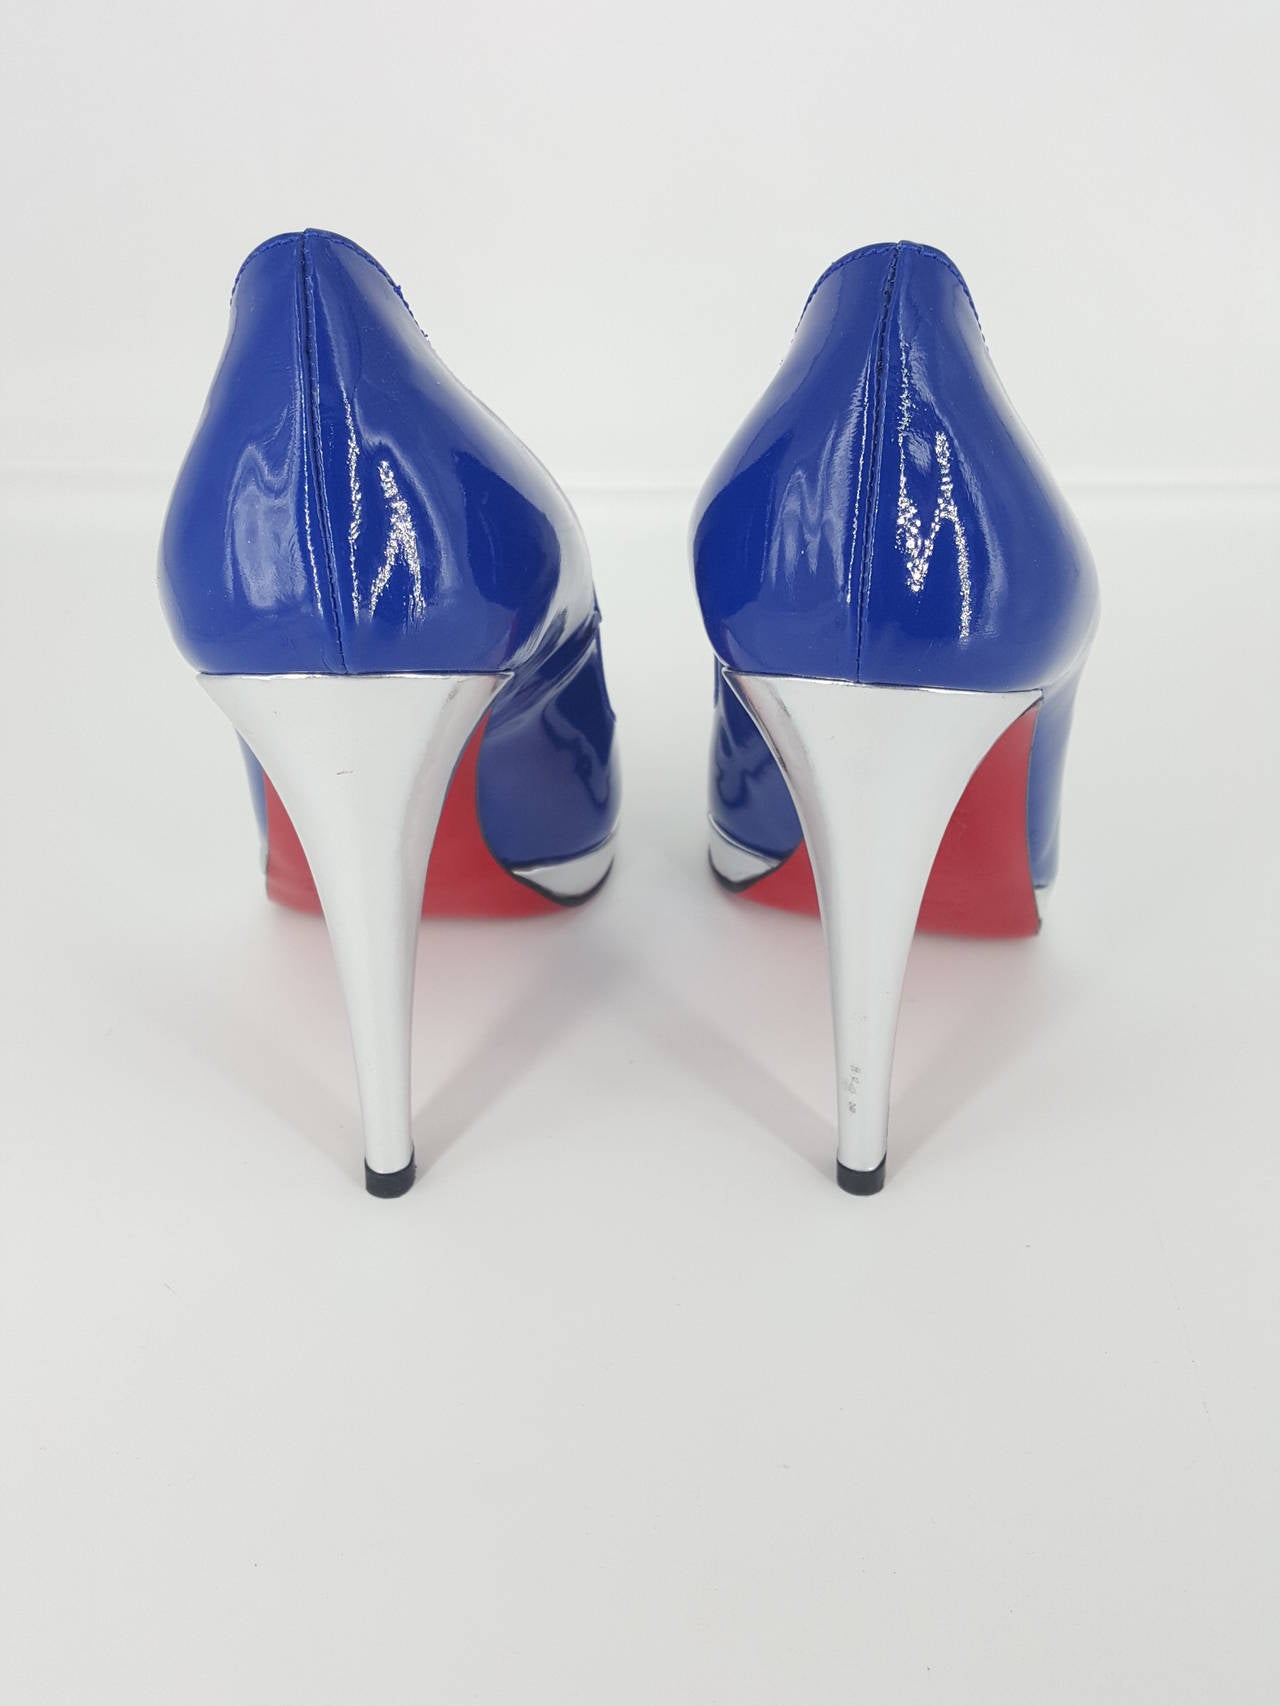 Offered for sale is a pair of Christian Louboutin platform pumps in a fabulous cobalt blue and silver with a silver heel.  These are closed toe with a 1/2